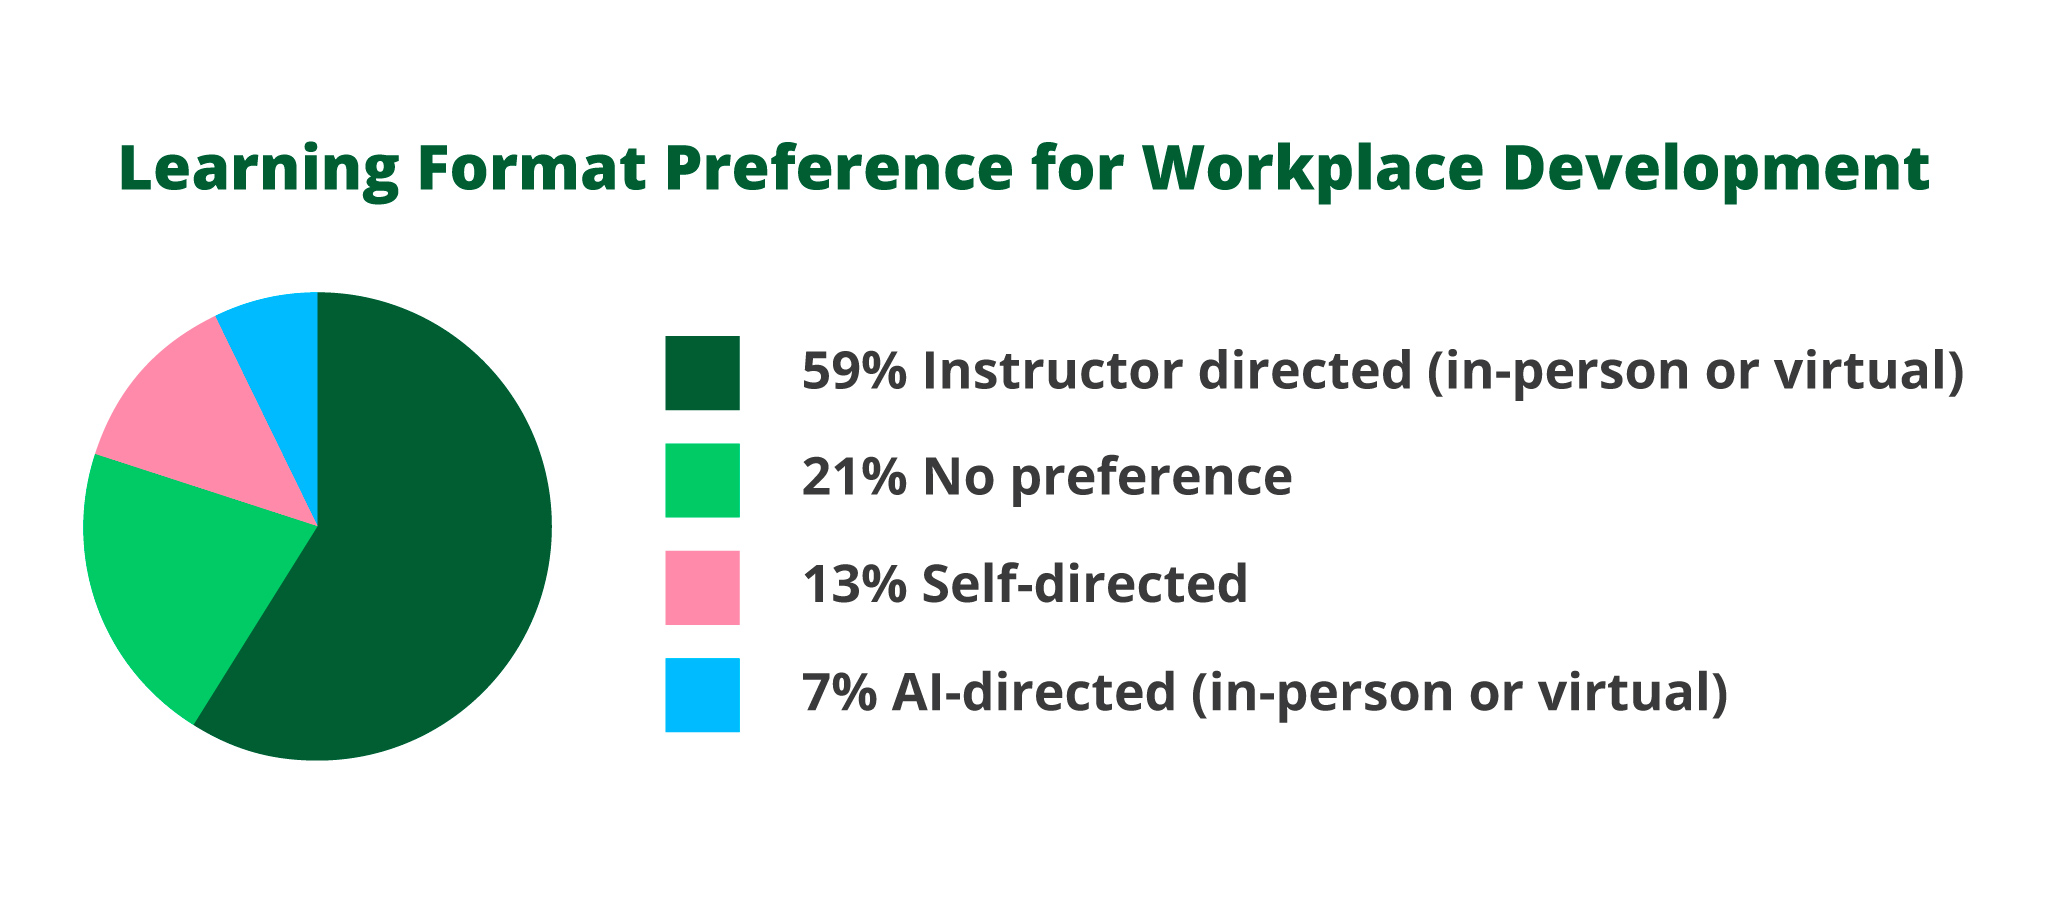 Learning Format Preference for Workplace Development